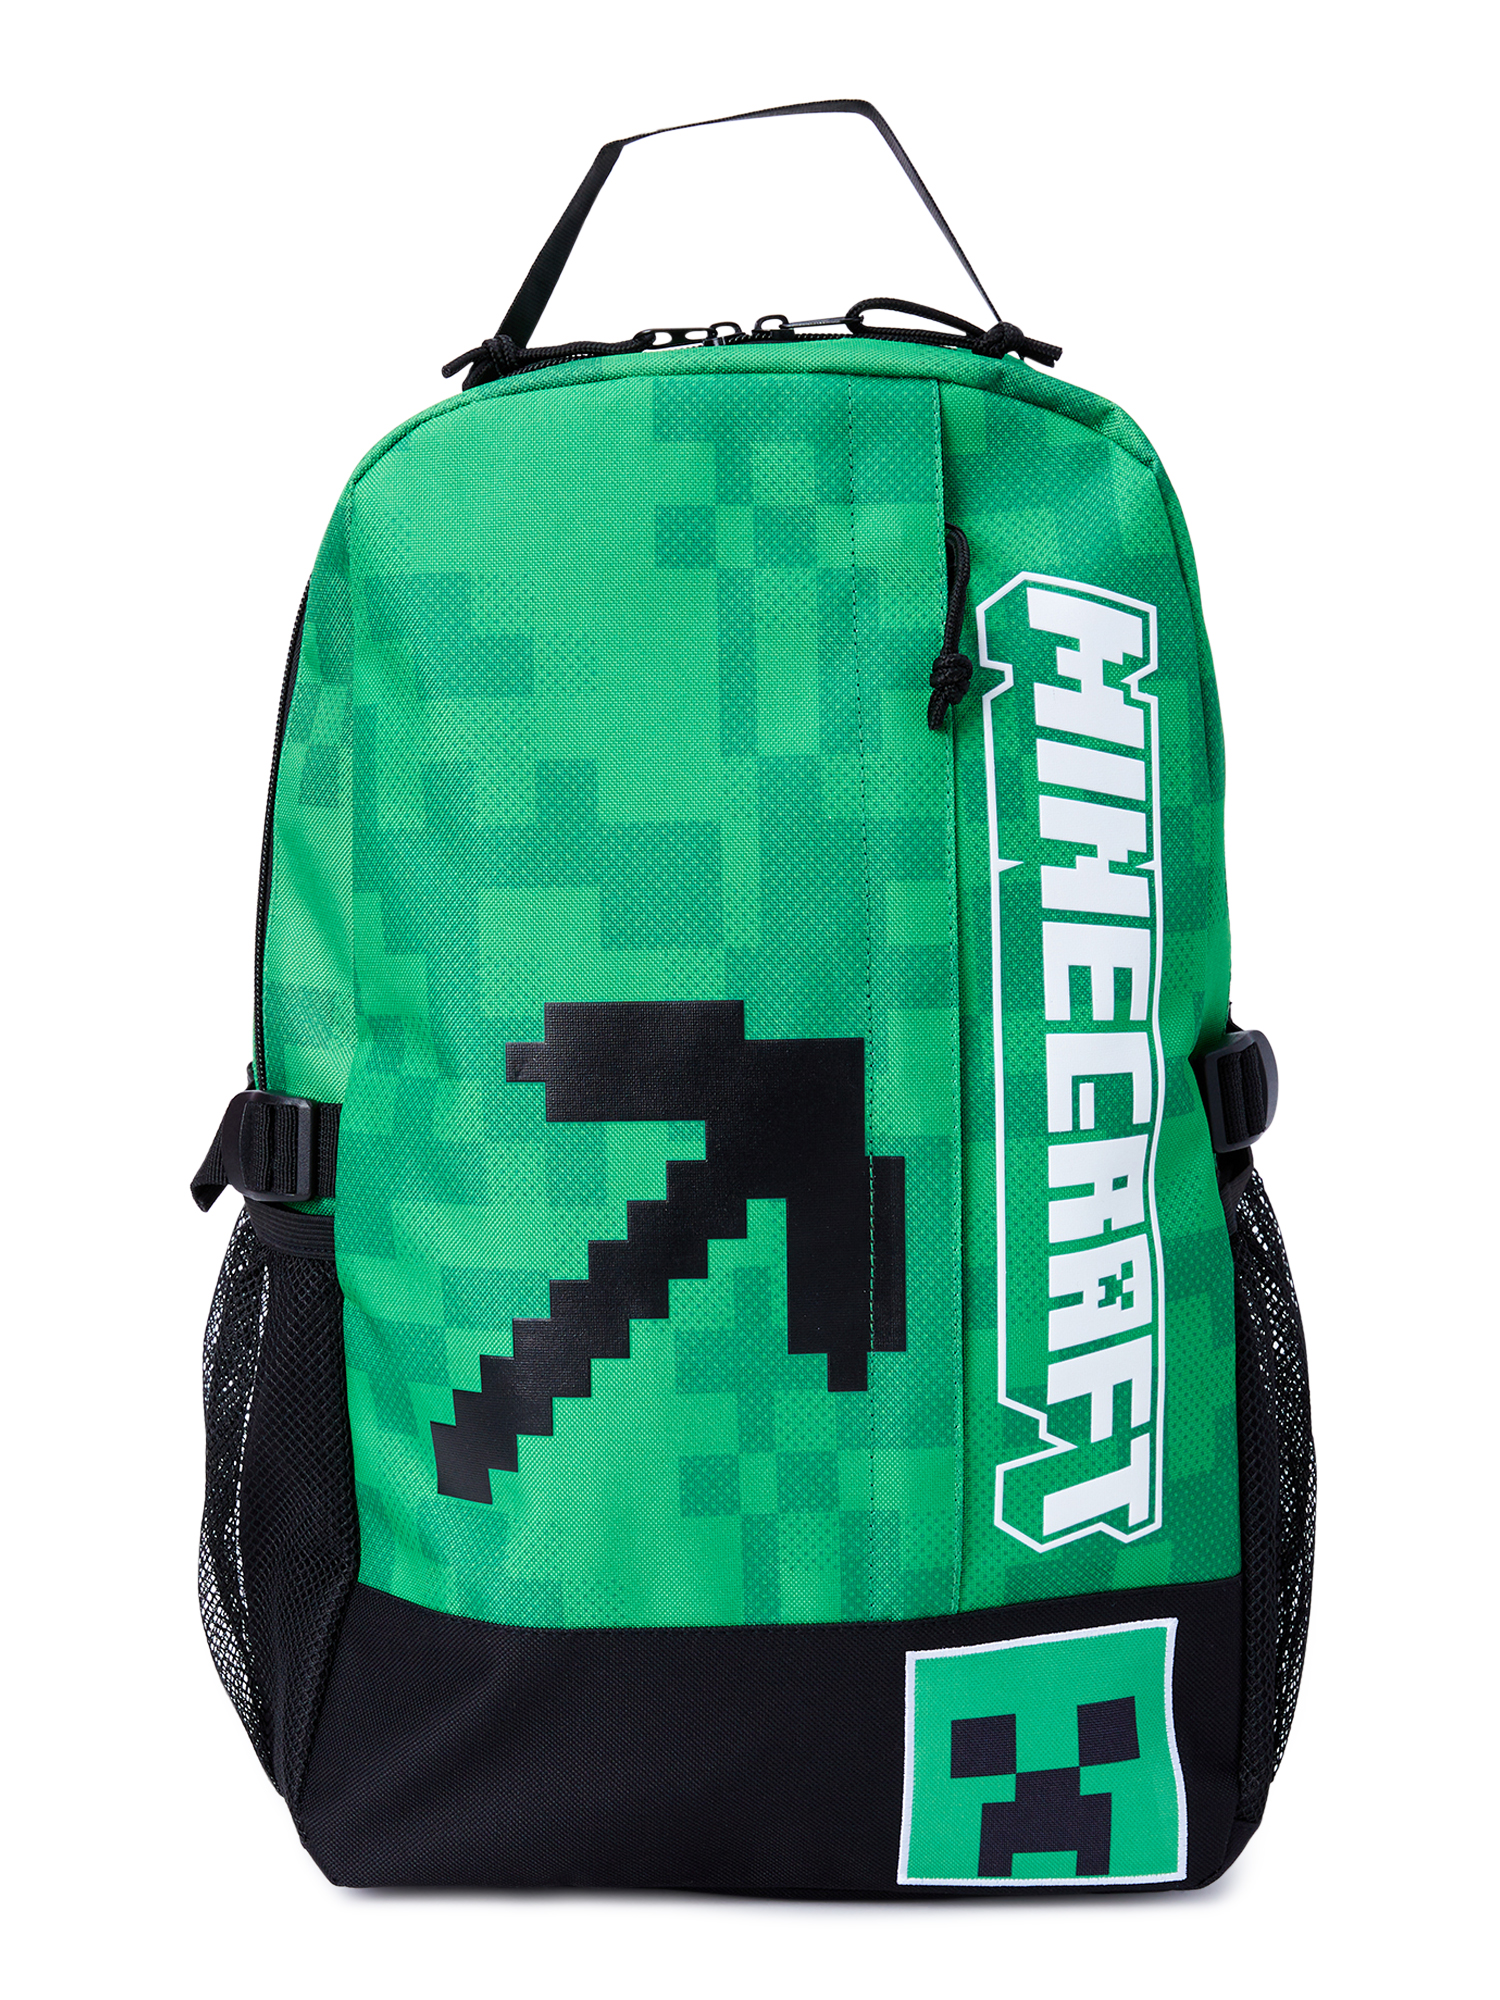 Minecraft Pickaxe Creeper Unisex 18" Laptop Backpack, Green Black - image 1 of 5